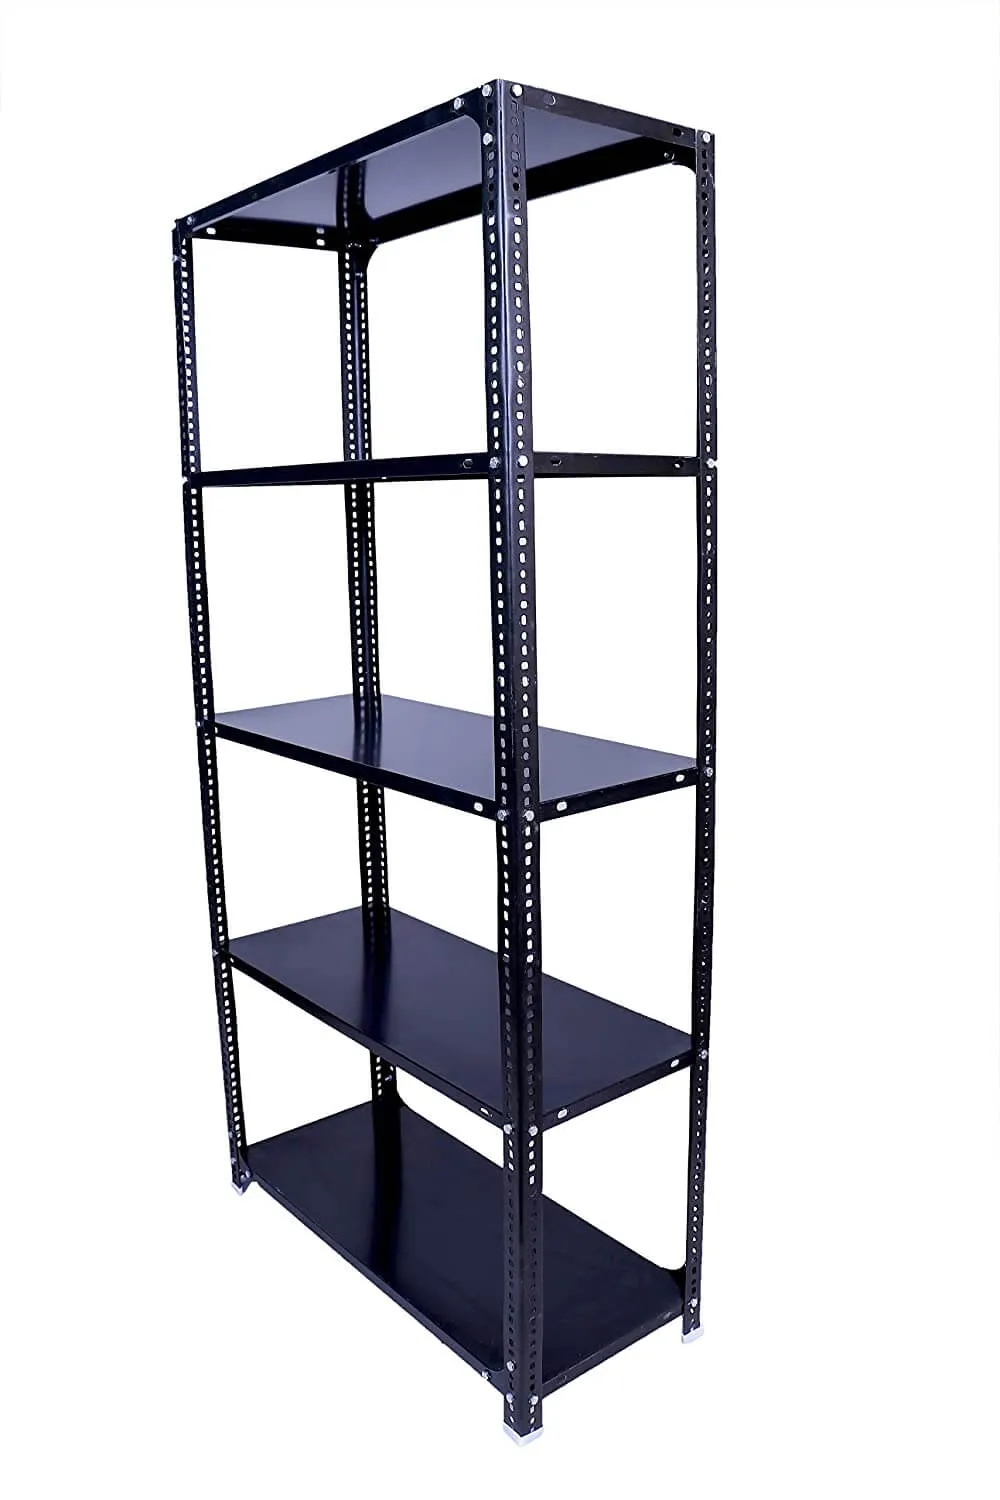 Slotted Angle Racks In Suratgarh